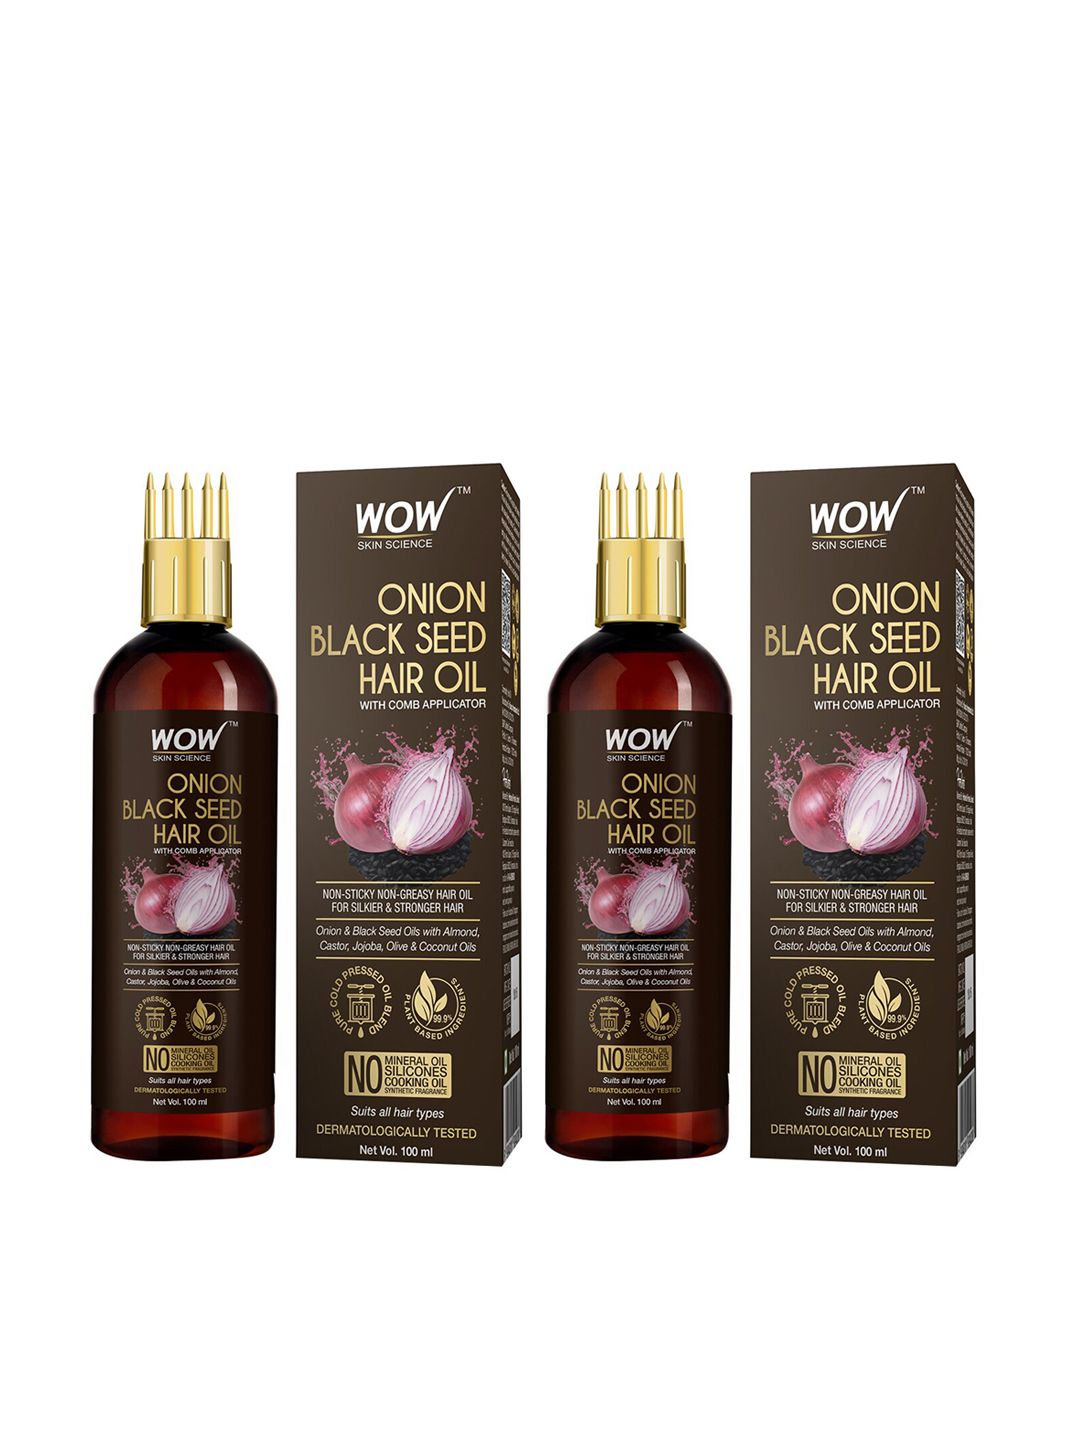 WOW SKIN SCIENCE Set of 2 Onion Black Seed Hair Oil with Comb Applicator Price in India